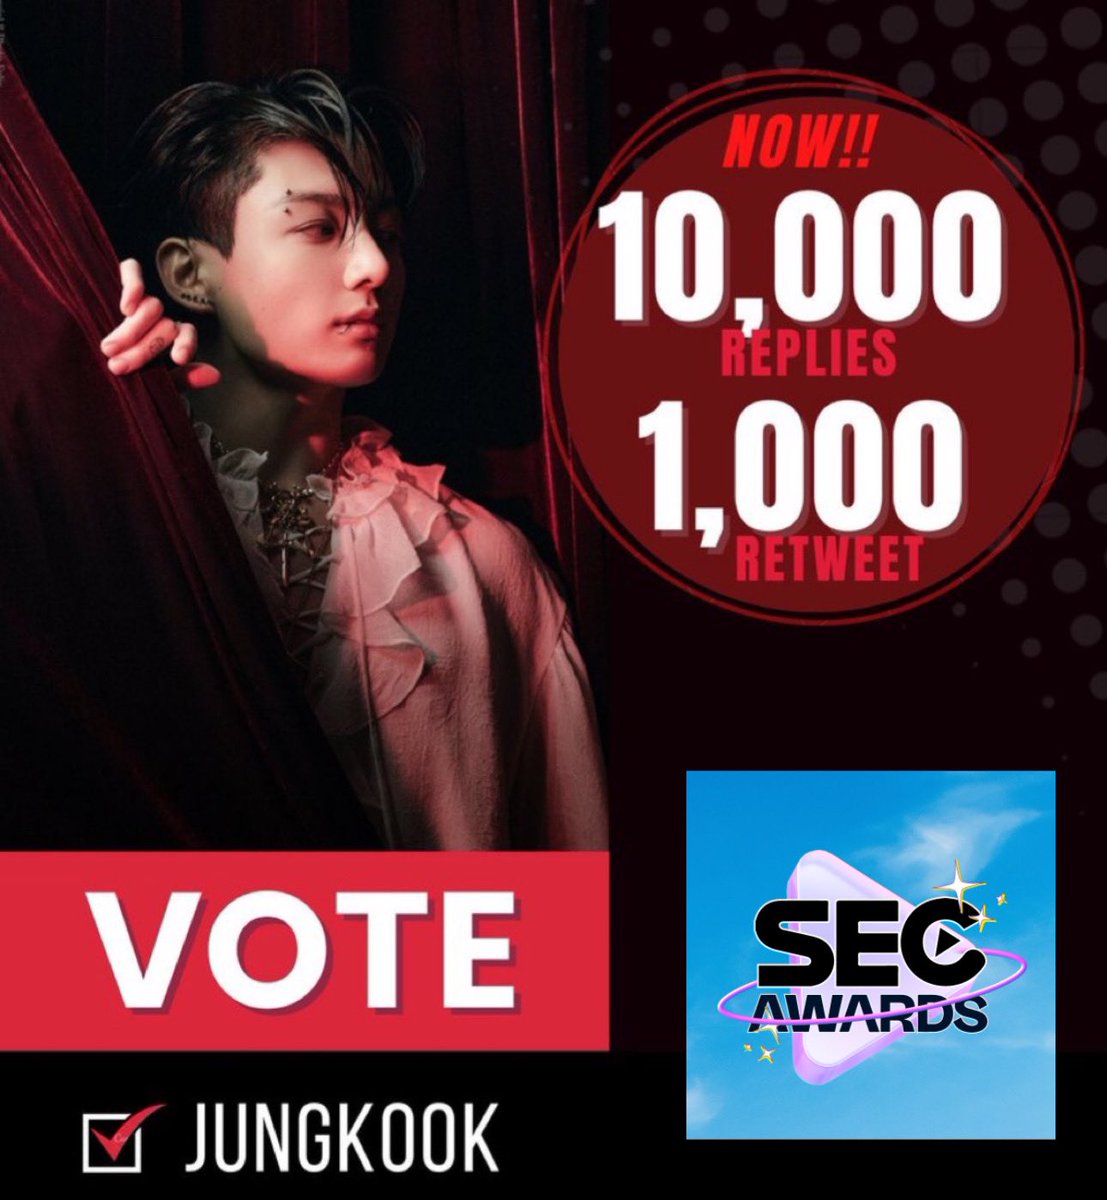 📊SEC AWARDS VOTING CHALLENGE FOR JUNGKOOK 💌 300 USD WILL BE DONATED 📍10,000 REPLIES — 2 HOURS 📍1,000 RT — 2 HOURS ☑️JUNGKOOK MEDIA TITLES ☑️JUNGKOOK MAJOR AWARDS ☑️JUNGKOOK SHOE BRANDS ☑️ALL WORDS START WITH A ☑️ALL WORDS START WITH B ☑️ FAVE VEGGIES I vote #JungKook as…